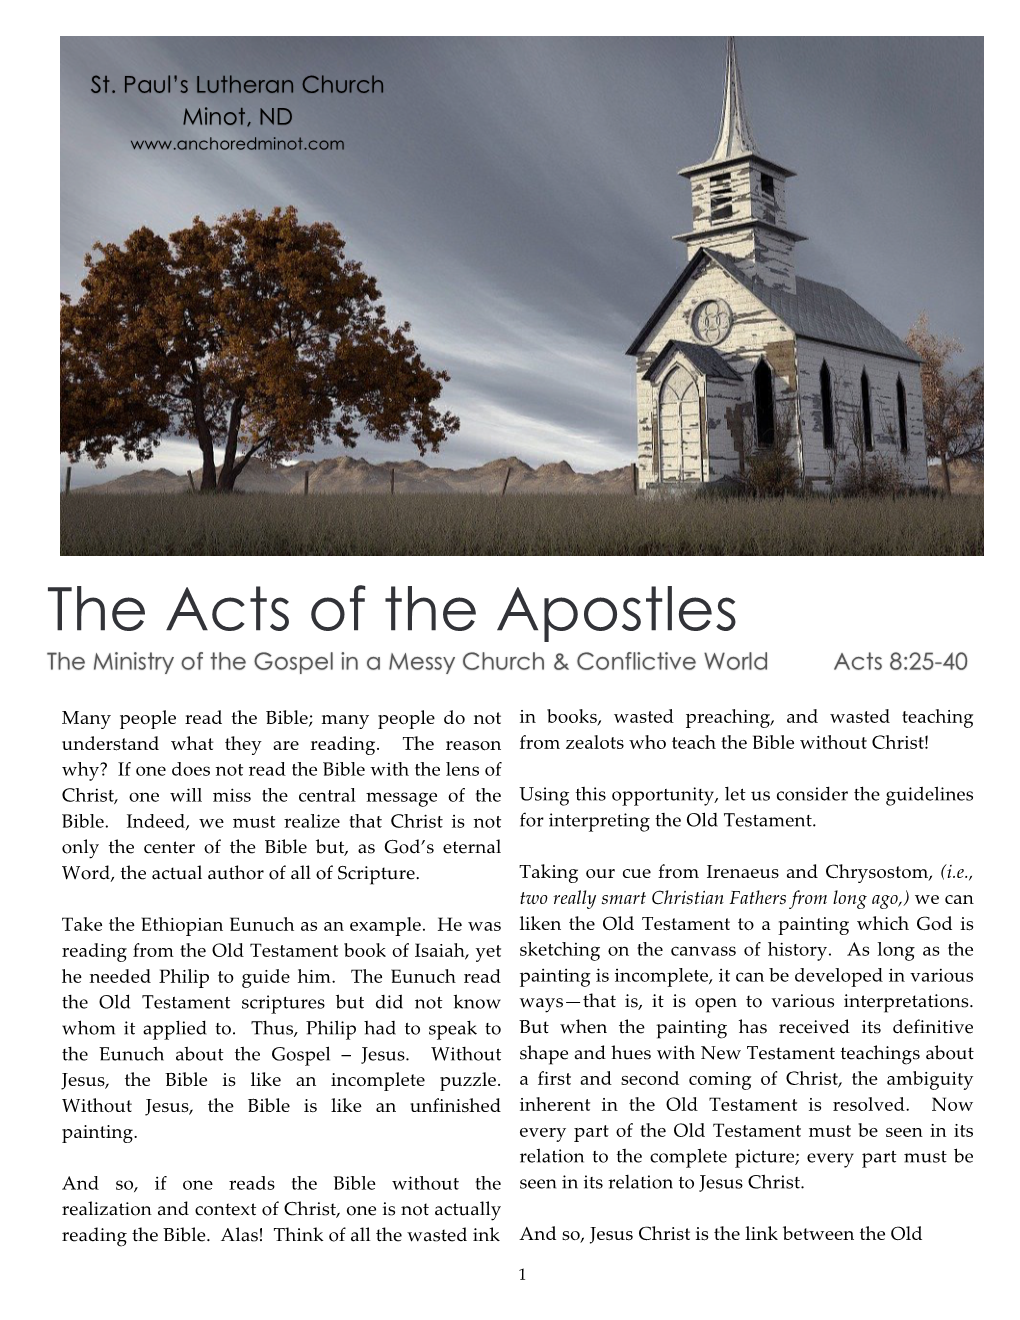 The Acts of the Apostles the Ministry of the Gospel in a Messy Church & Conflictive World Acts 8:25-40